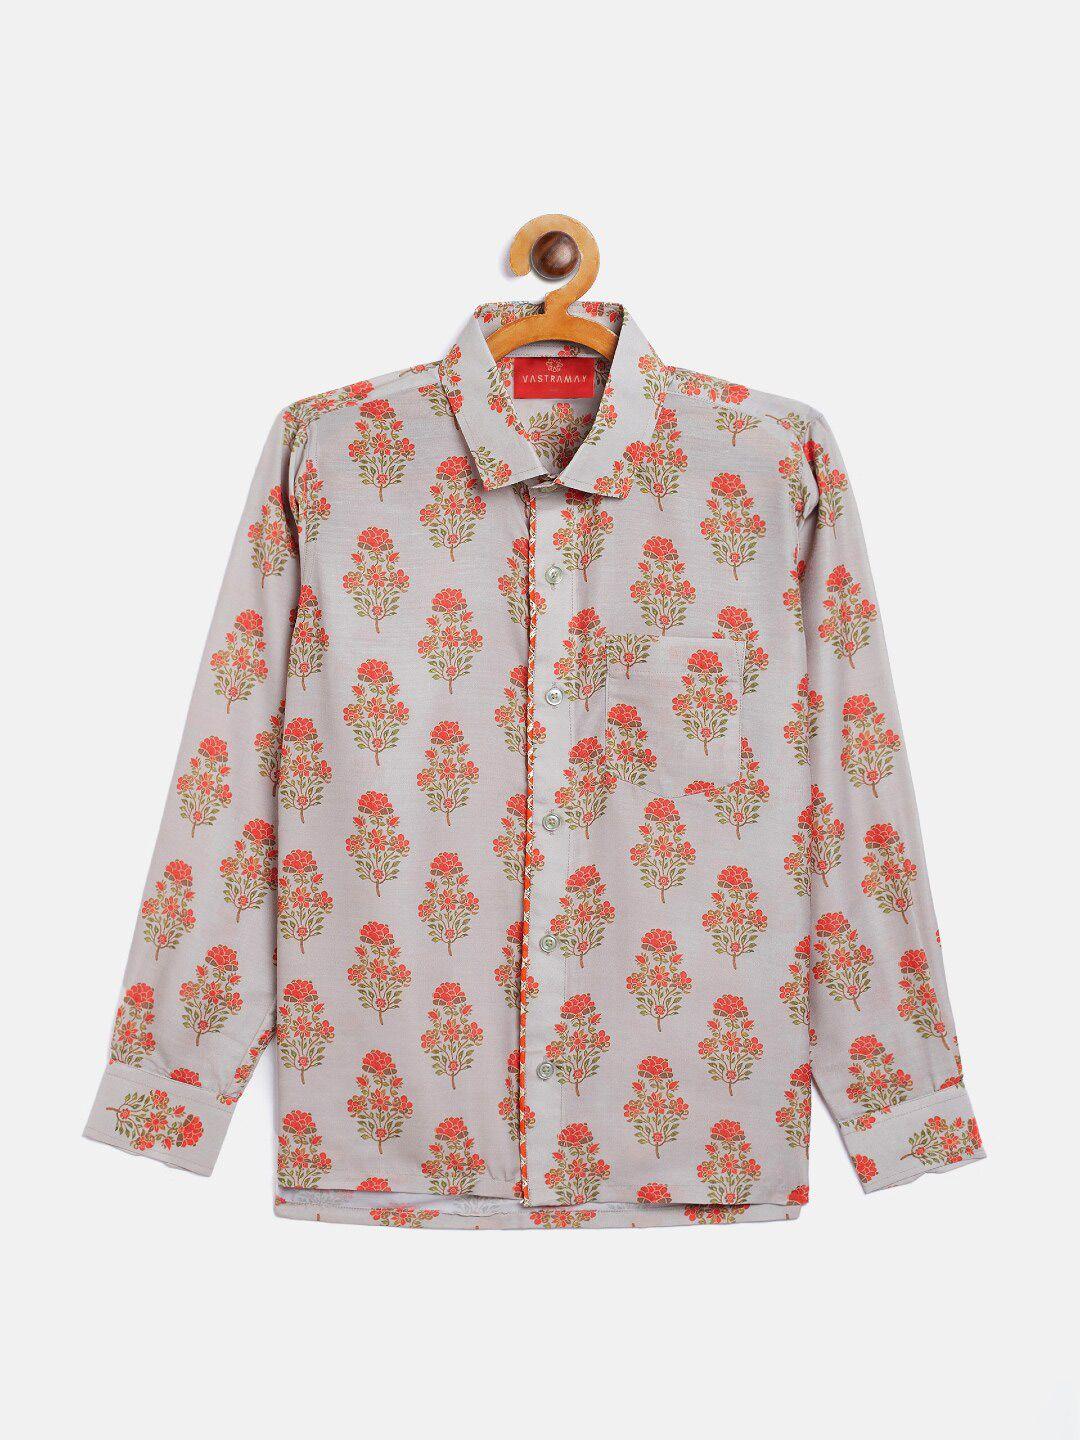 vastramay-boys-multicoloured-floral-opaque-printed-party-shirt